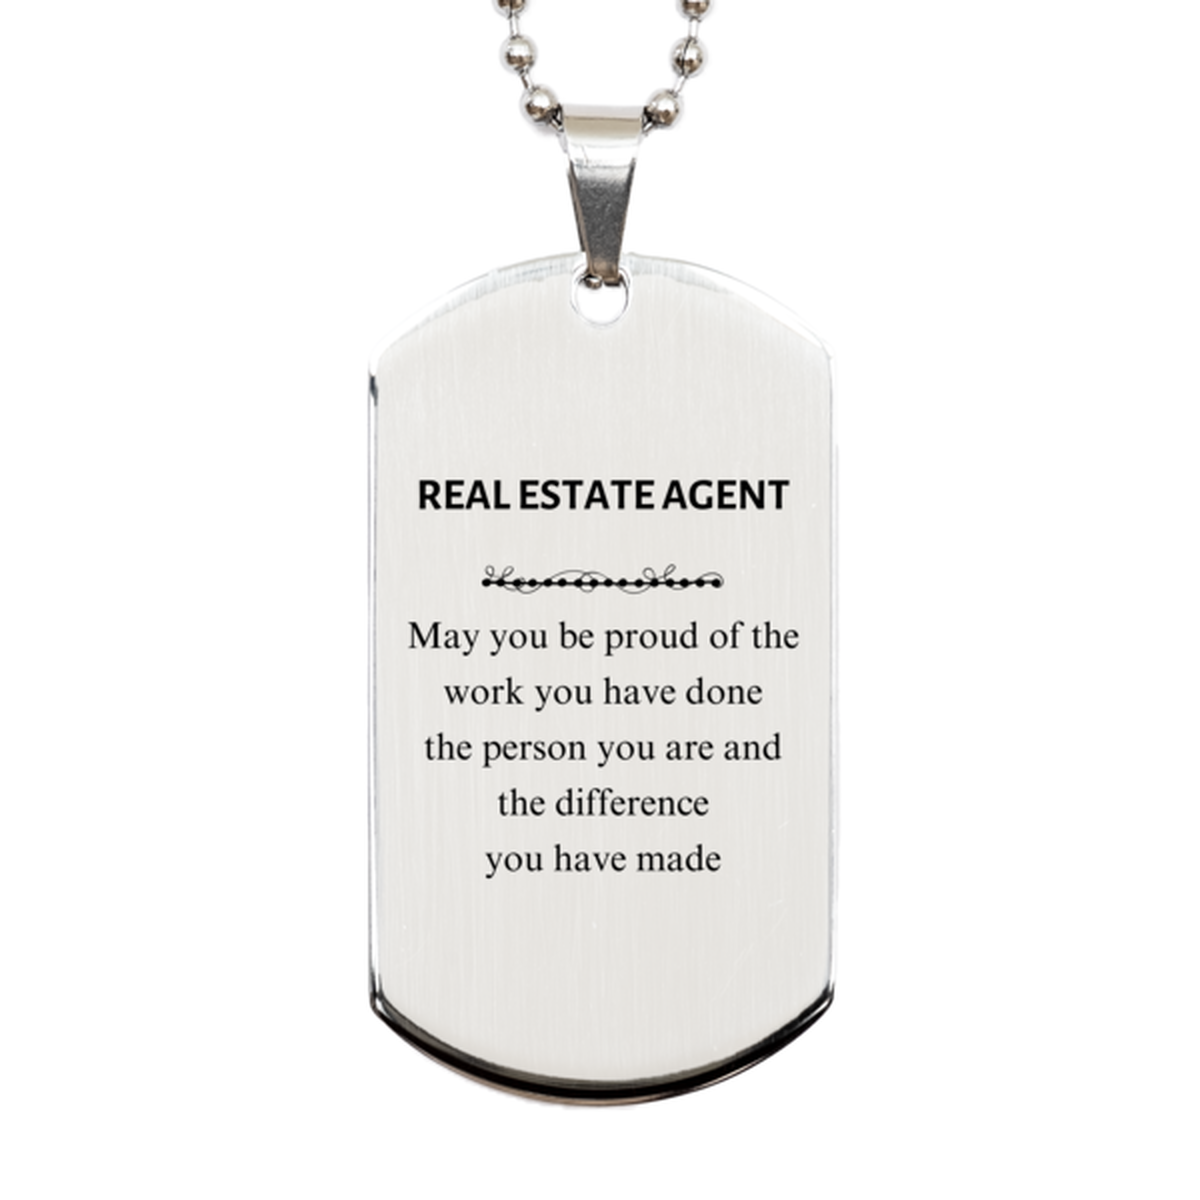 Real Estate Agent May you be proud of the work you have done, Retirement Real Estate Agent Silver Dog Tag for Colleague Appreciation Gifts Amazing for Real Estate Agent